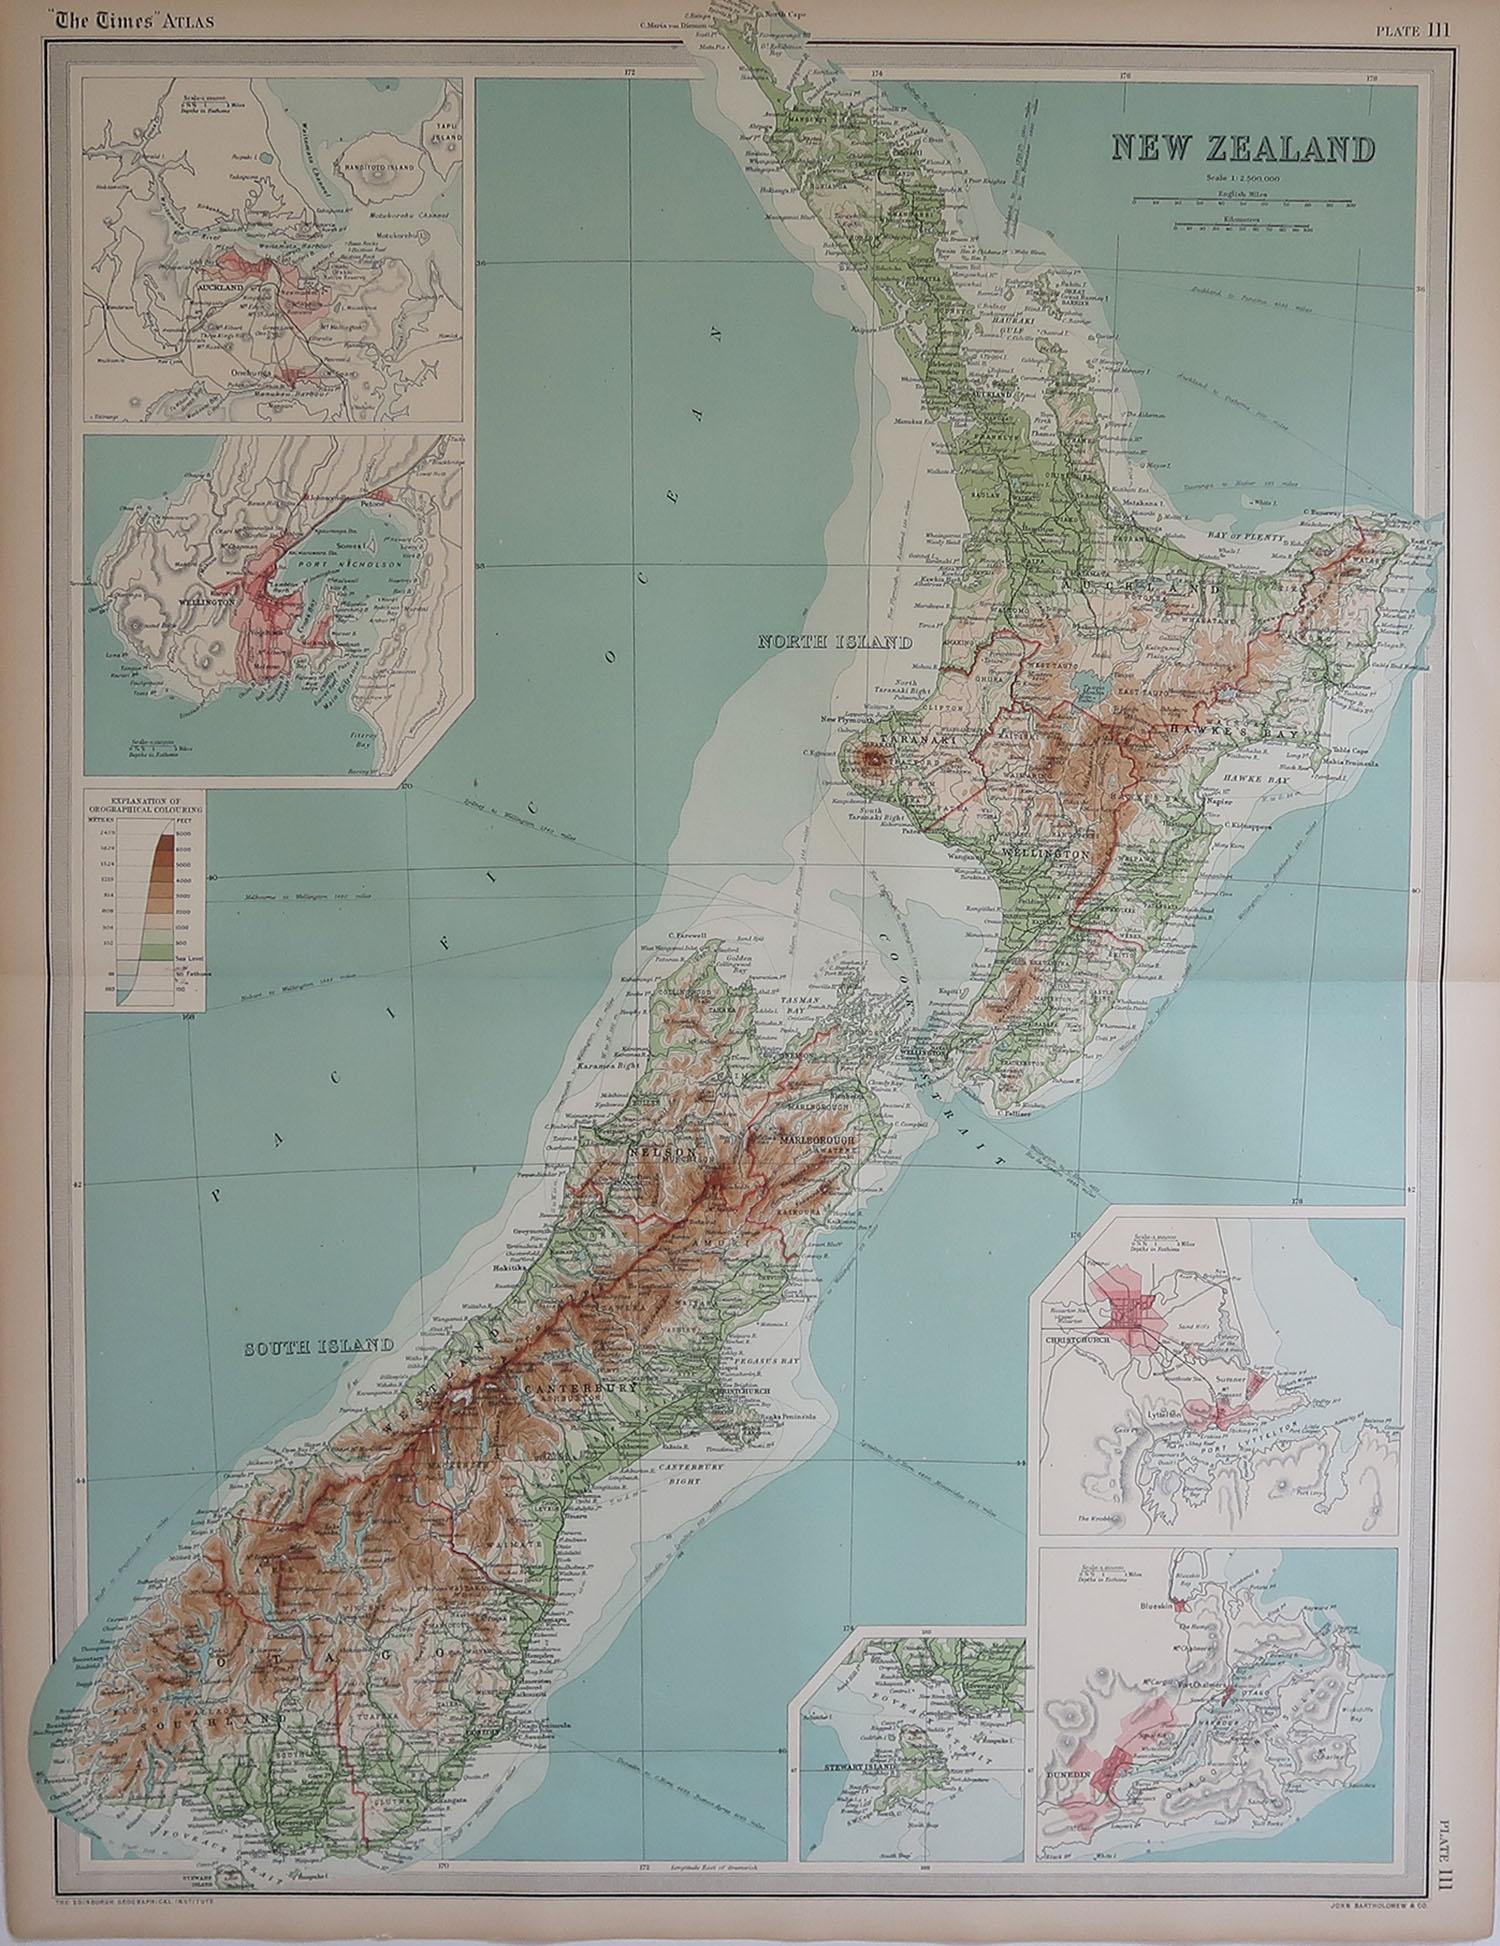 Great map New Zealand

Unframed

Original color

By John Bartholomew and Co. Edinburgh Geographical Institute

Published, circa 1920

Free shipping.
 